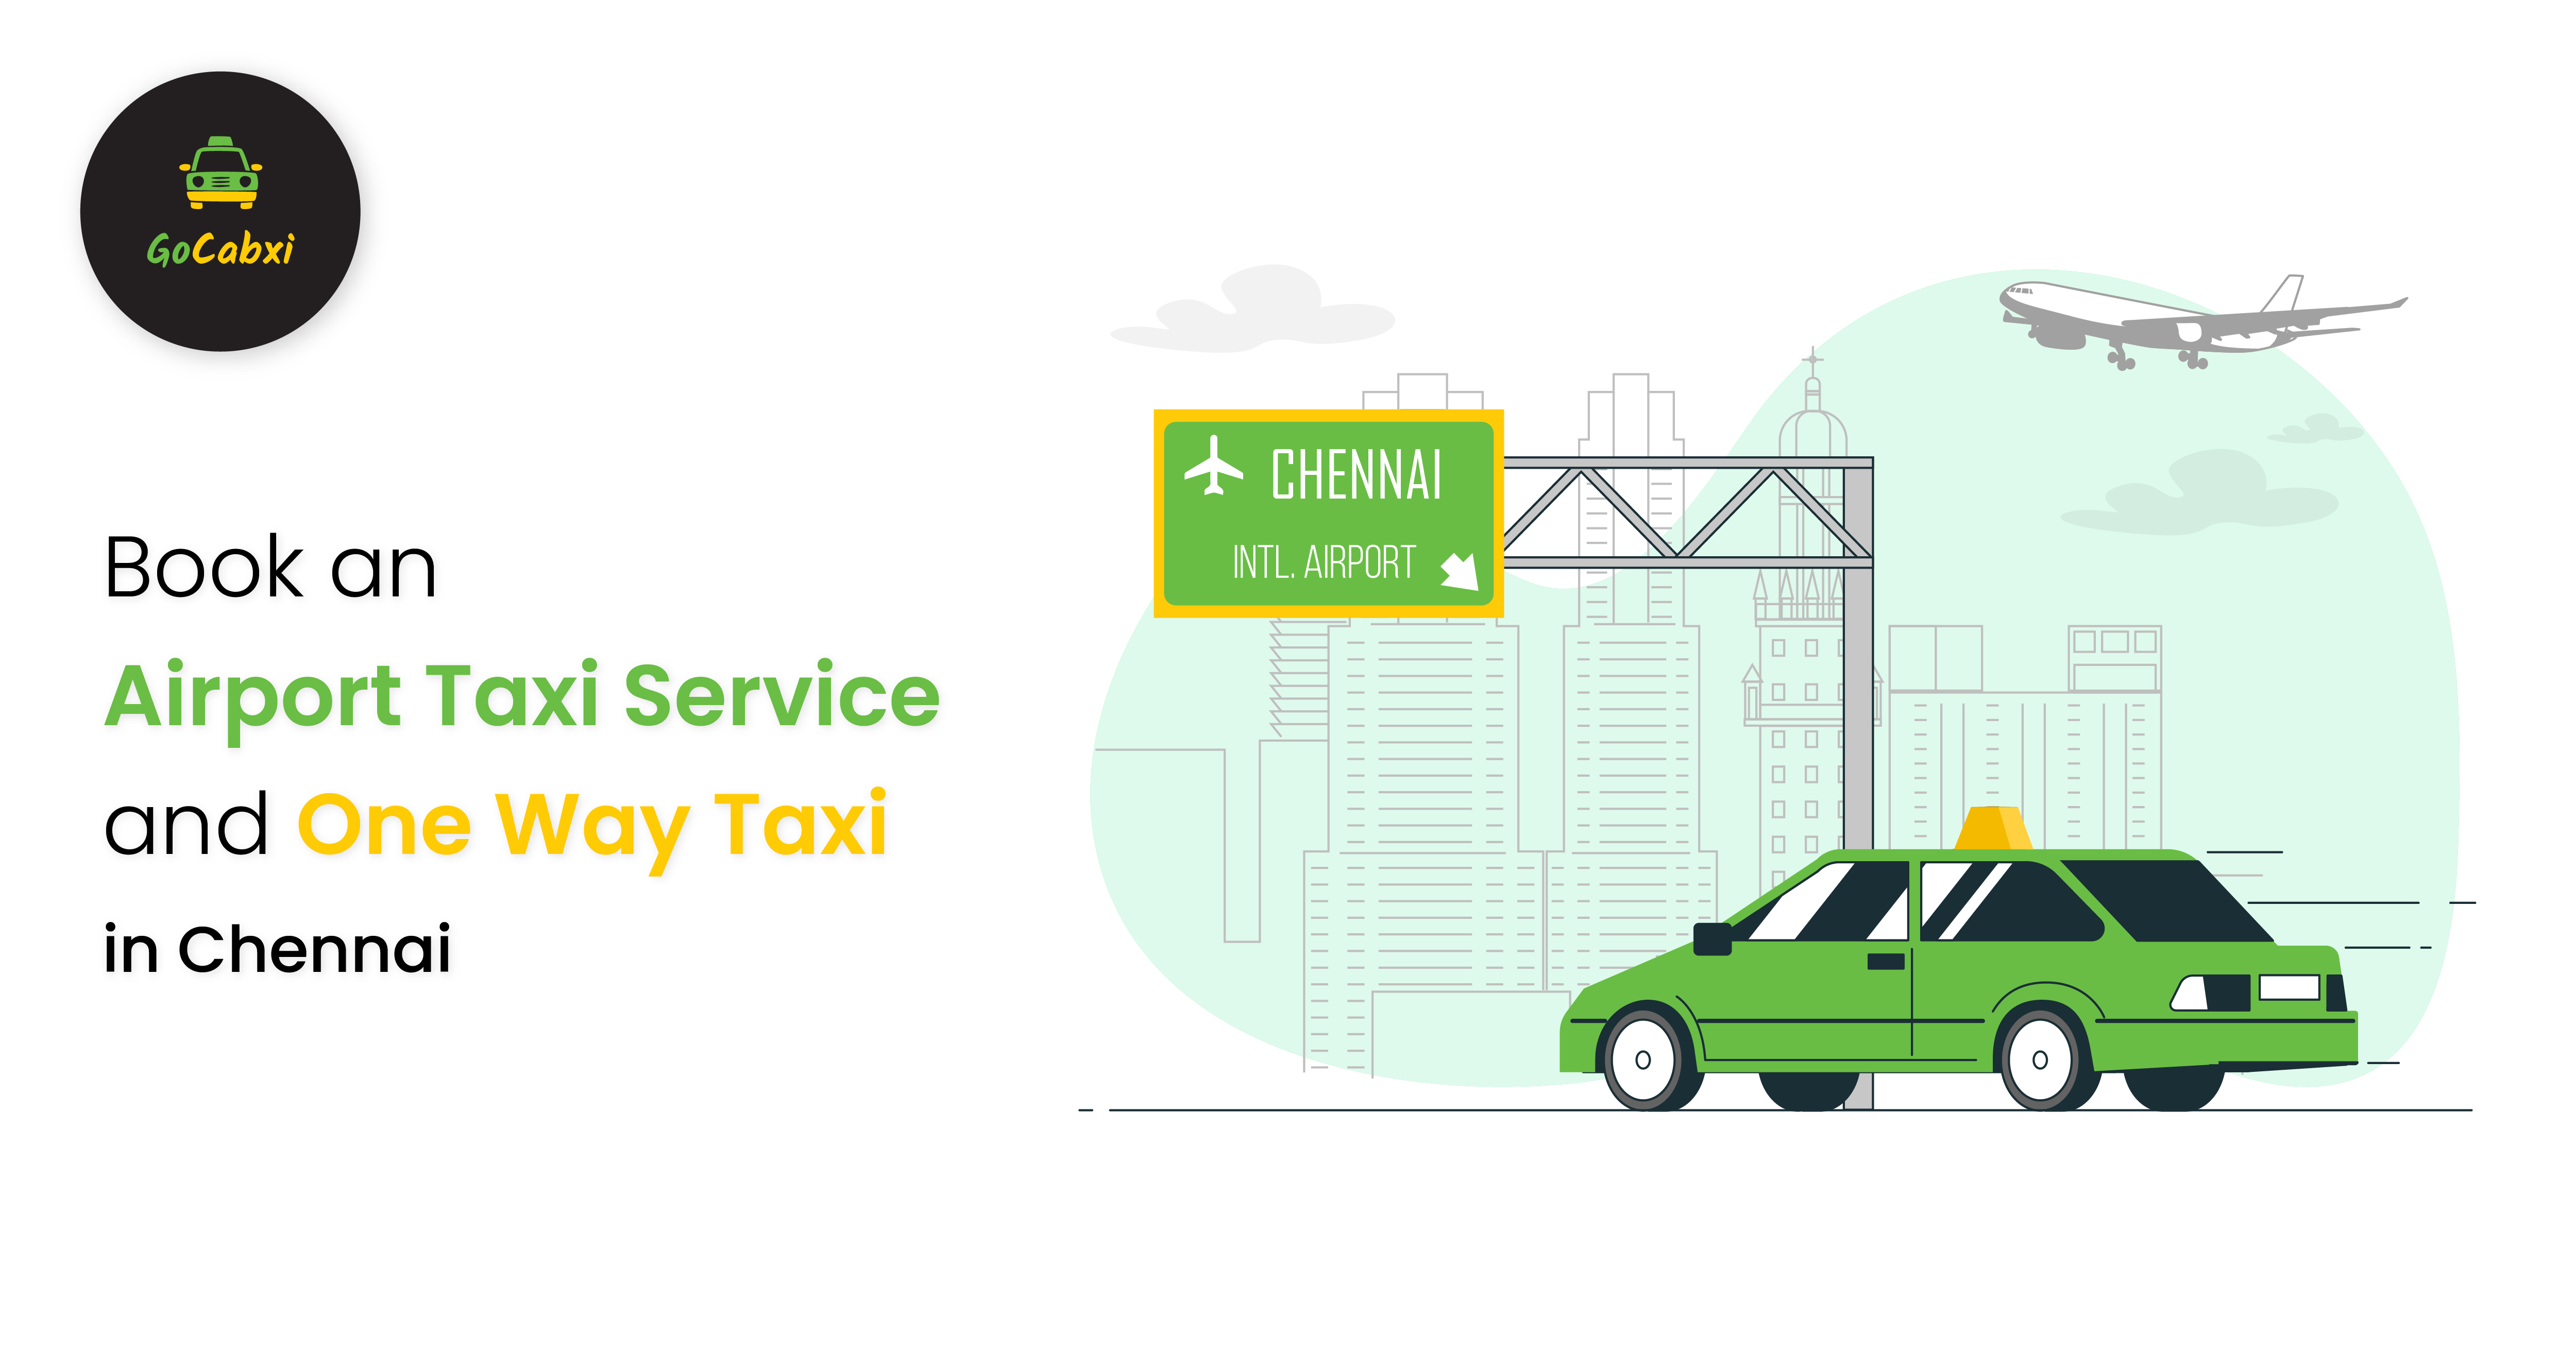 Book an Airport Taxi Service and One Way Taxi in Chennai | Gocabxi